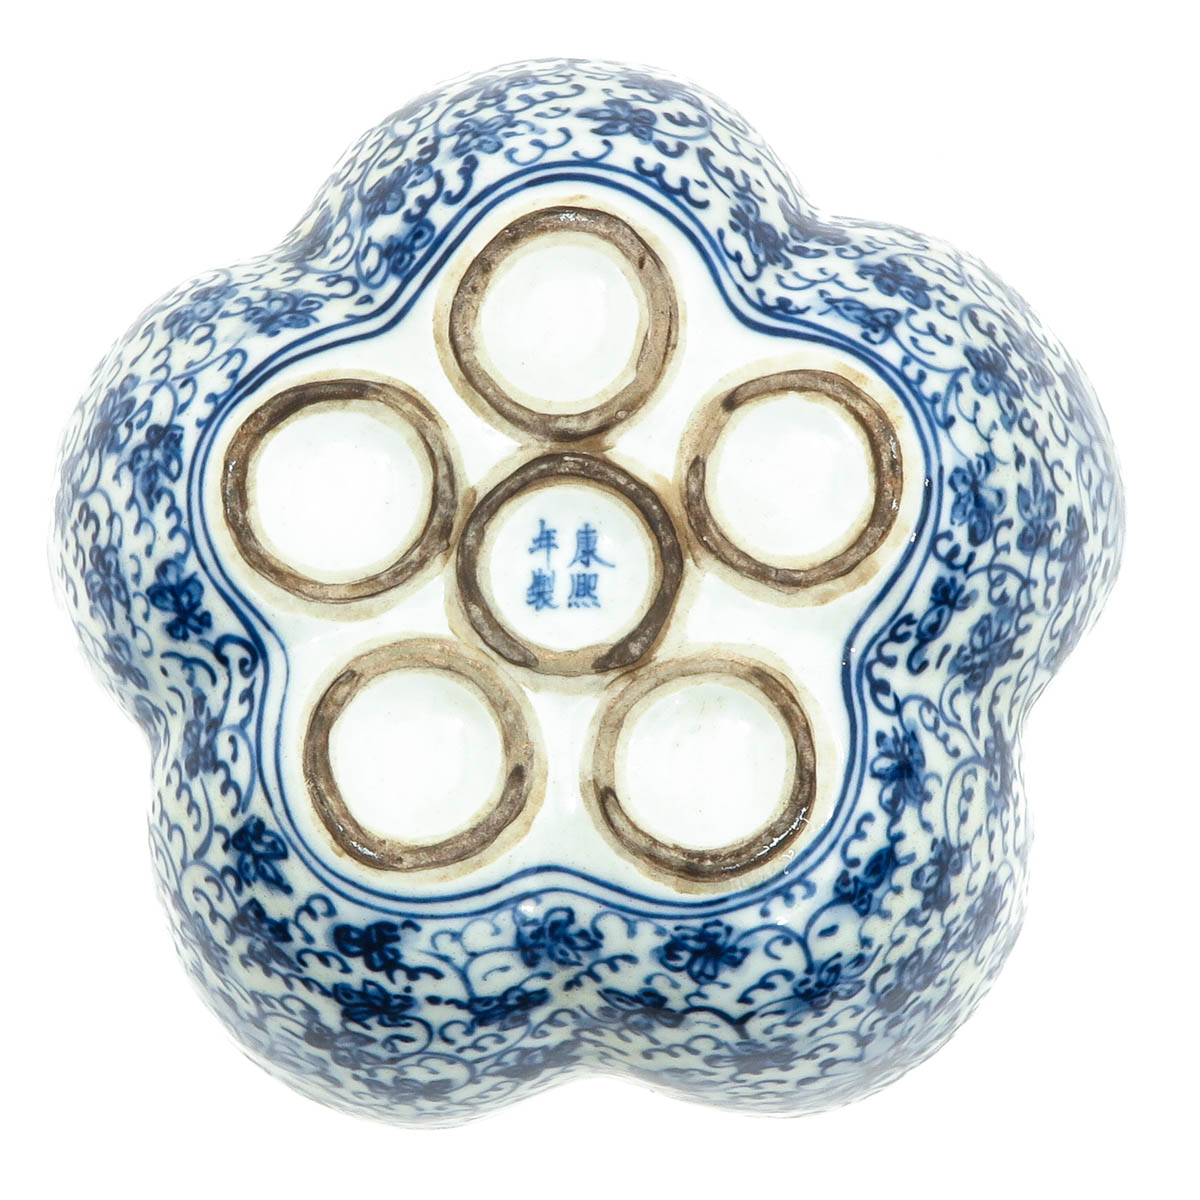 A Blue and White Tulip Vase - Image 6 of 10